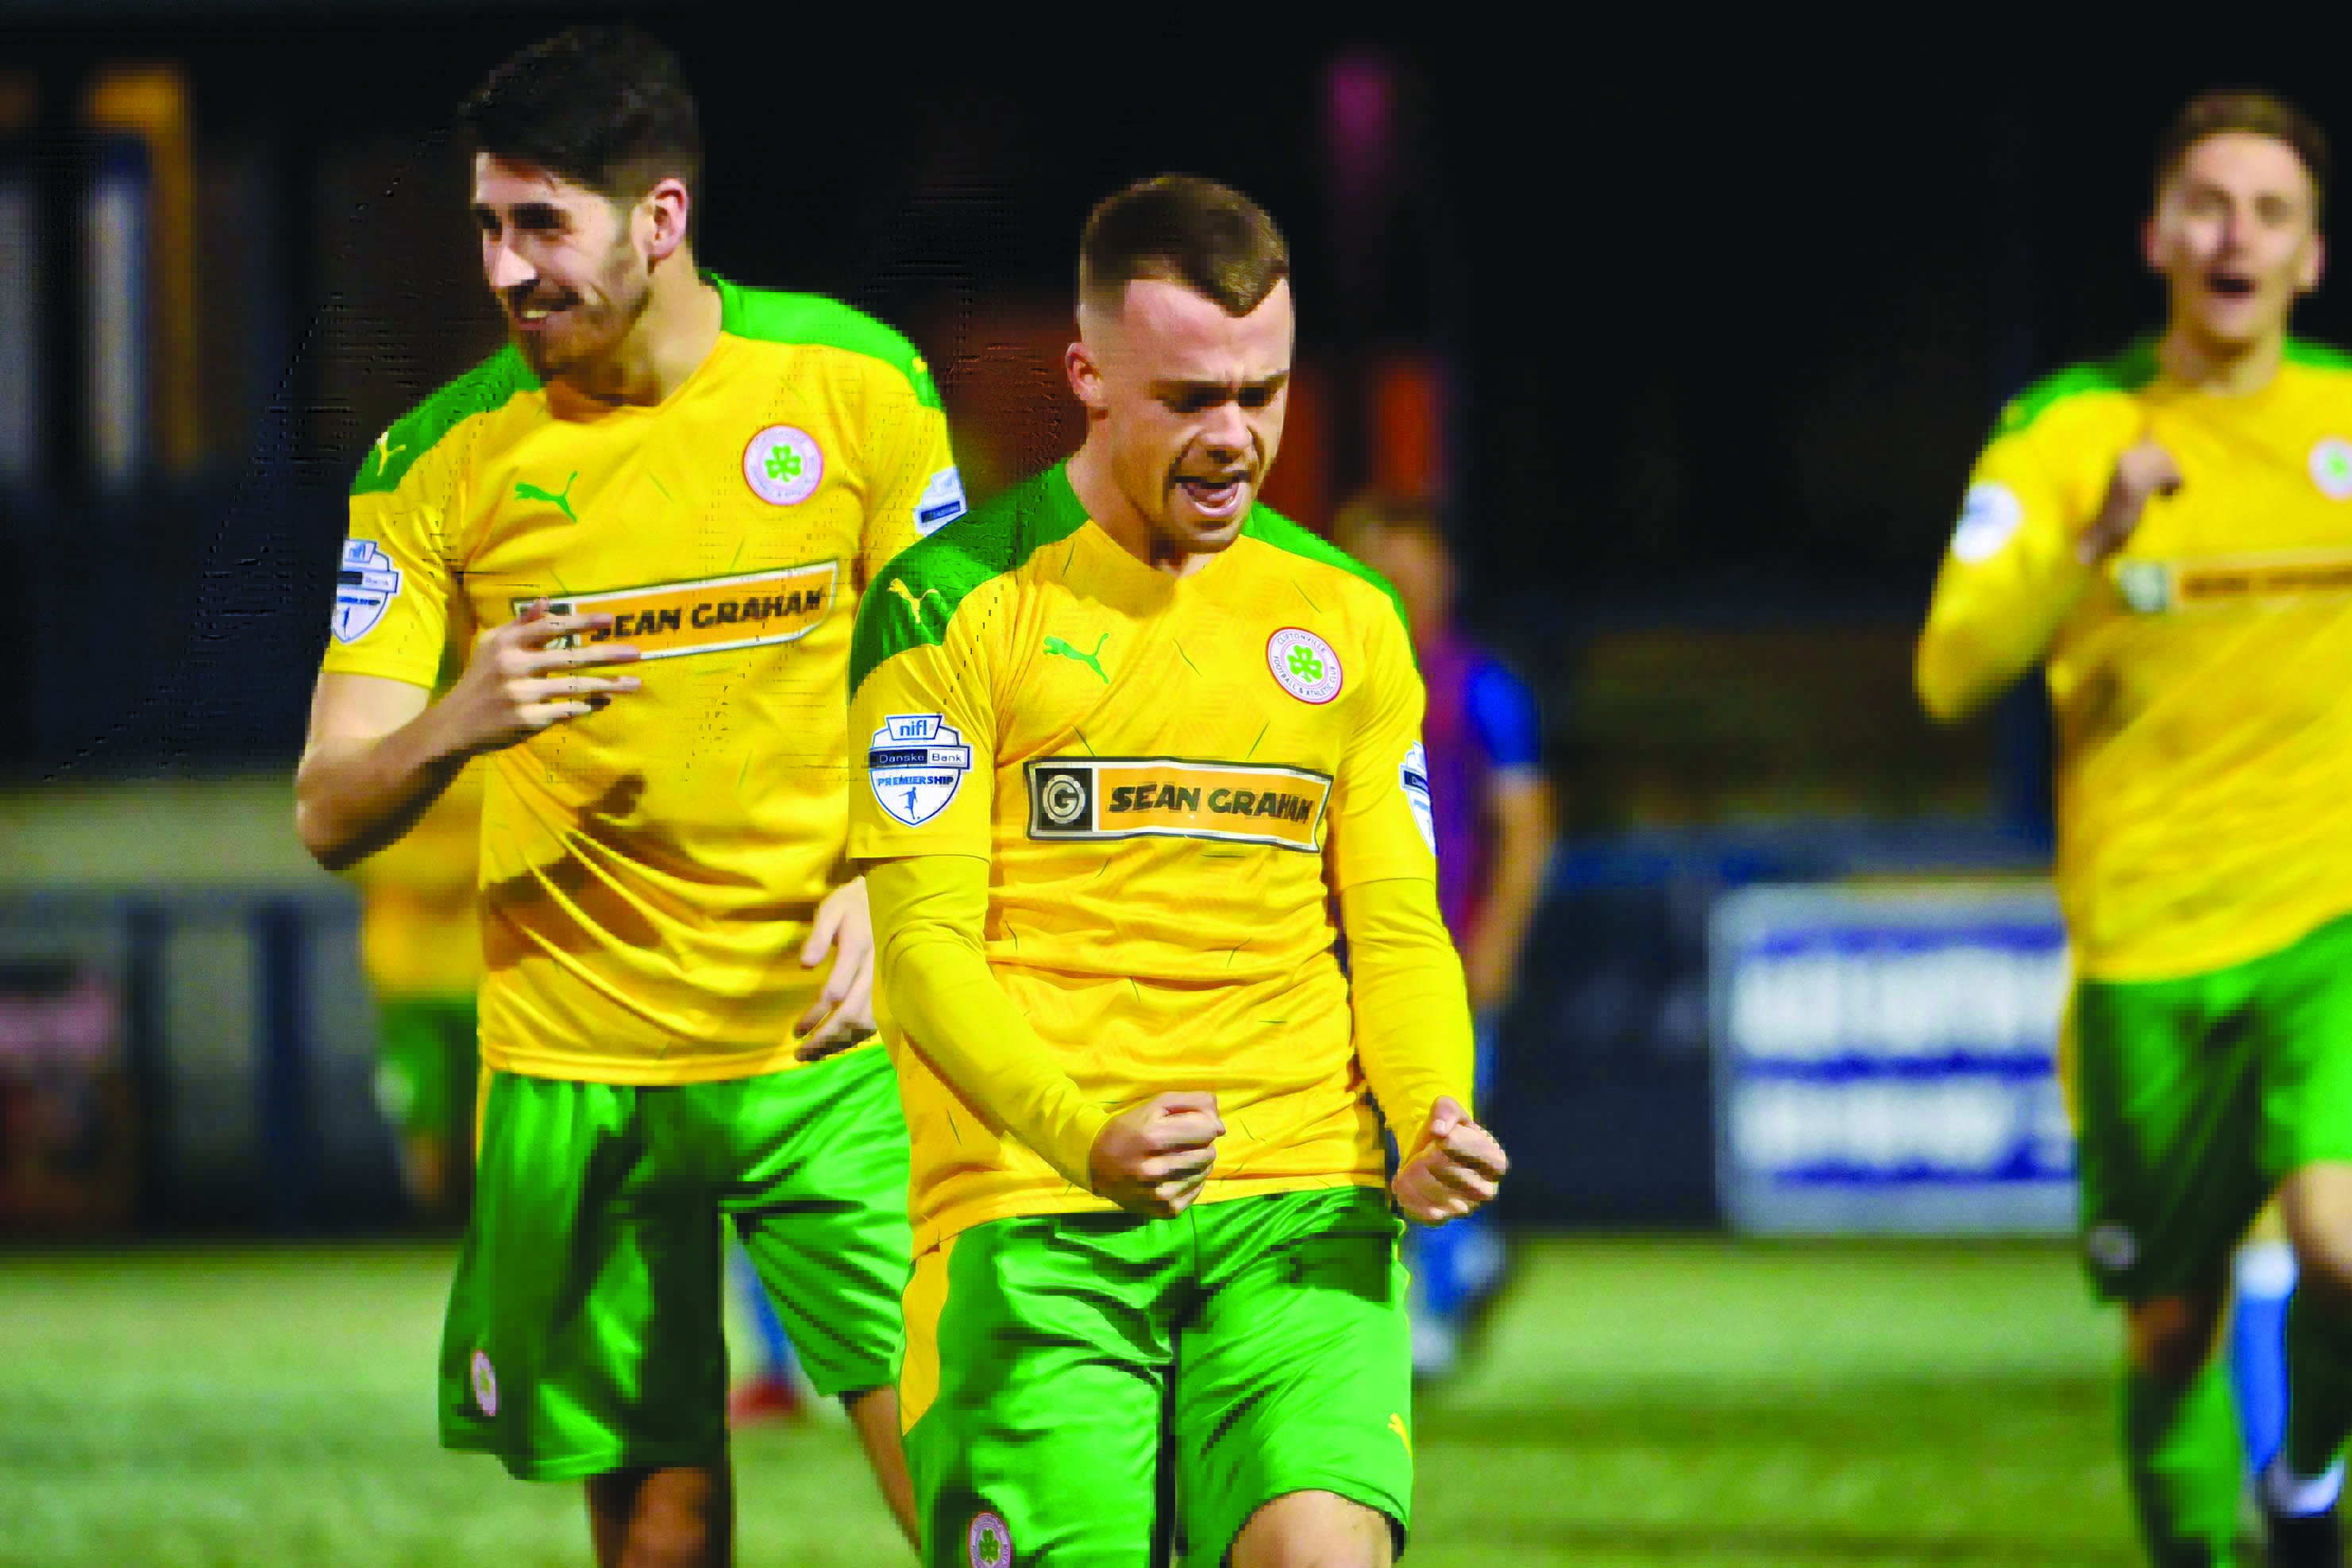 Cliftonville’s Chirs Gallagher celebrates after restoring his side’s lead in Tuesday night’s League Cup third round clash with Ards. The Reds would go on to win the game 4-1 to set up a quarter-final meeting with Portdown next month 